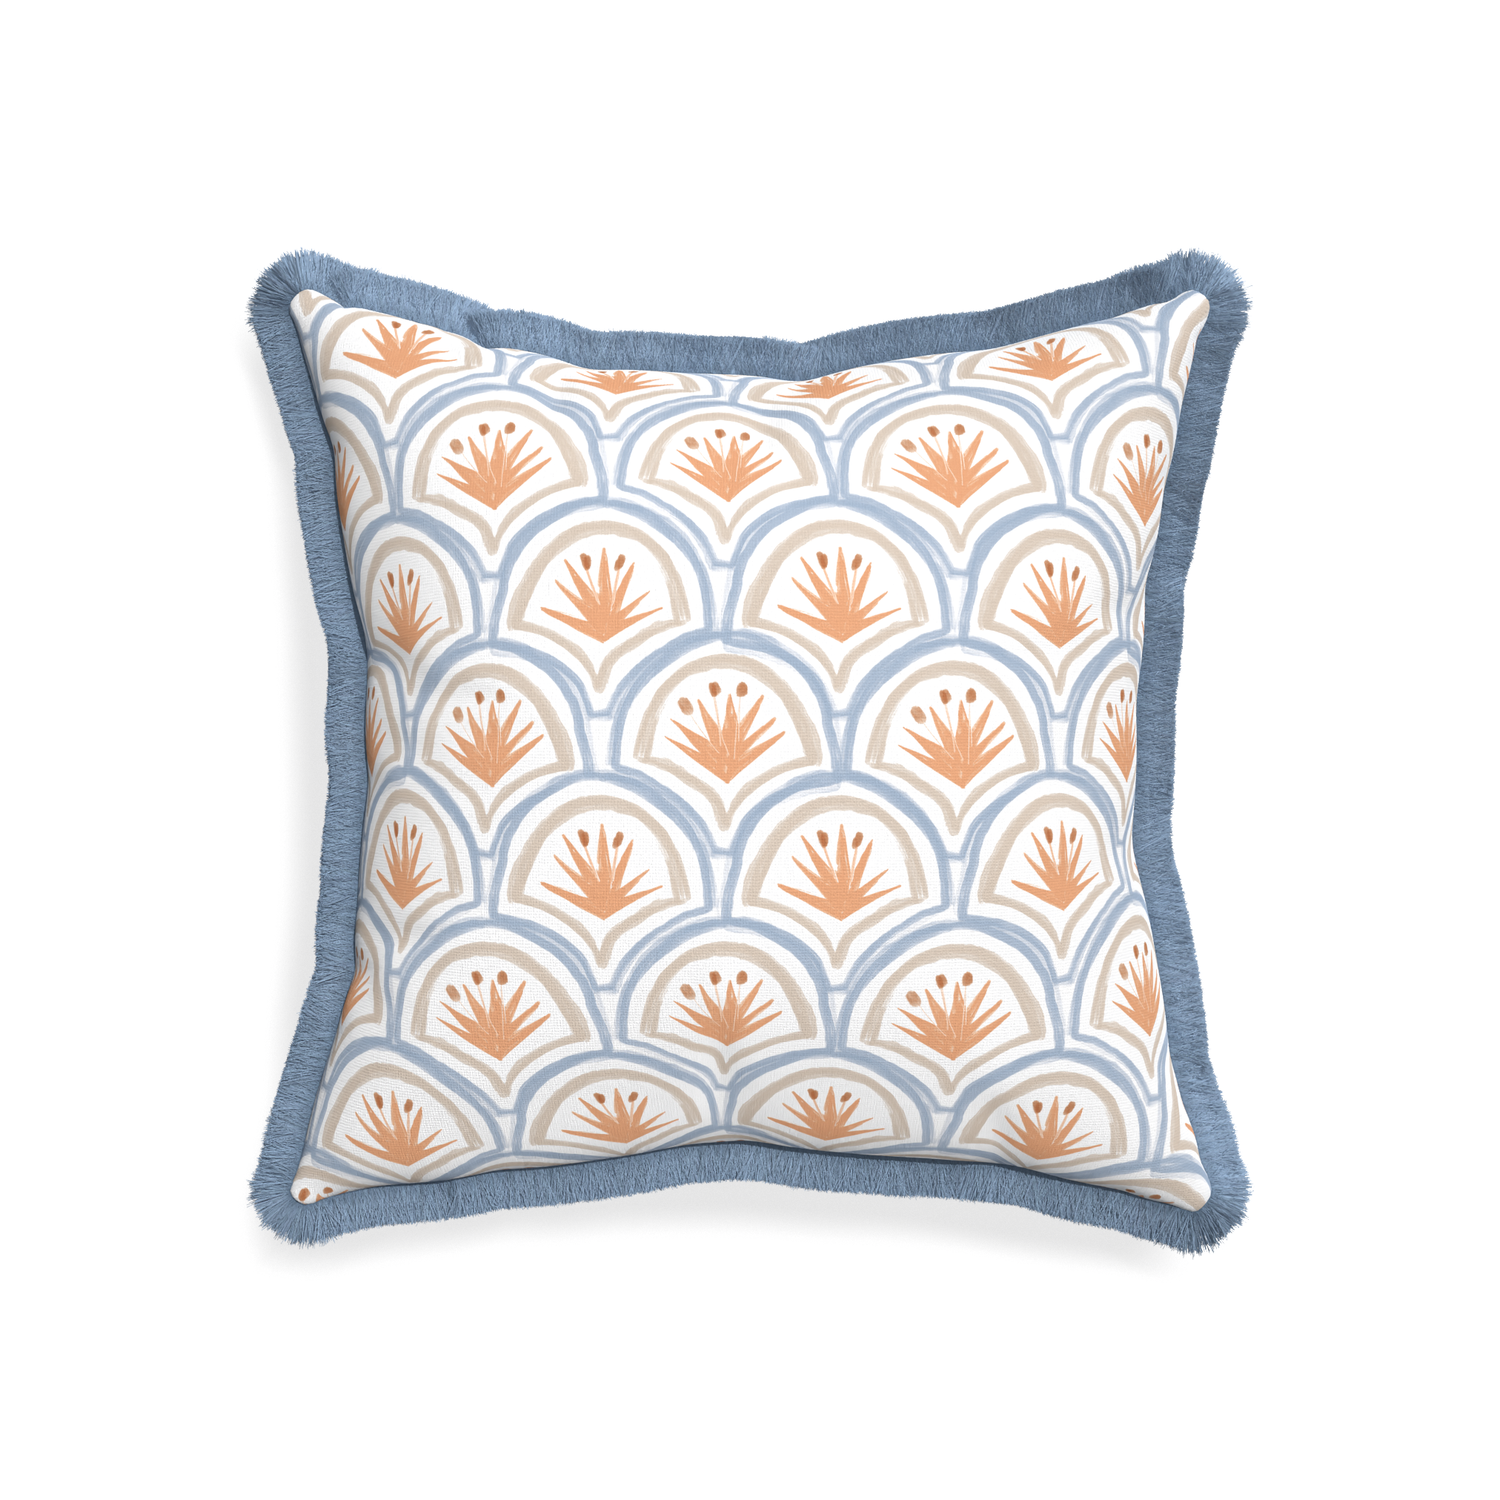 20-square thatcher apricot custom art deco palm patternpillow with sky fringe on white background